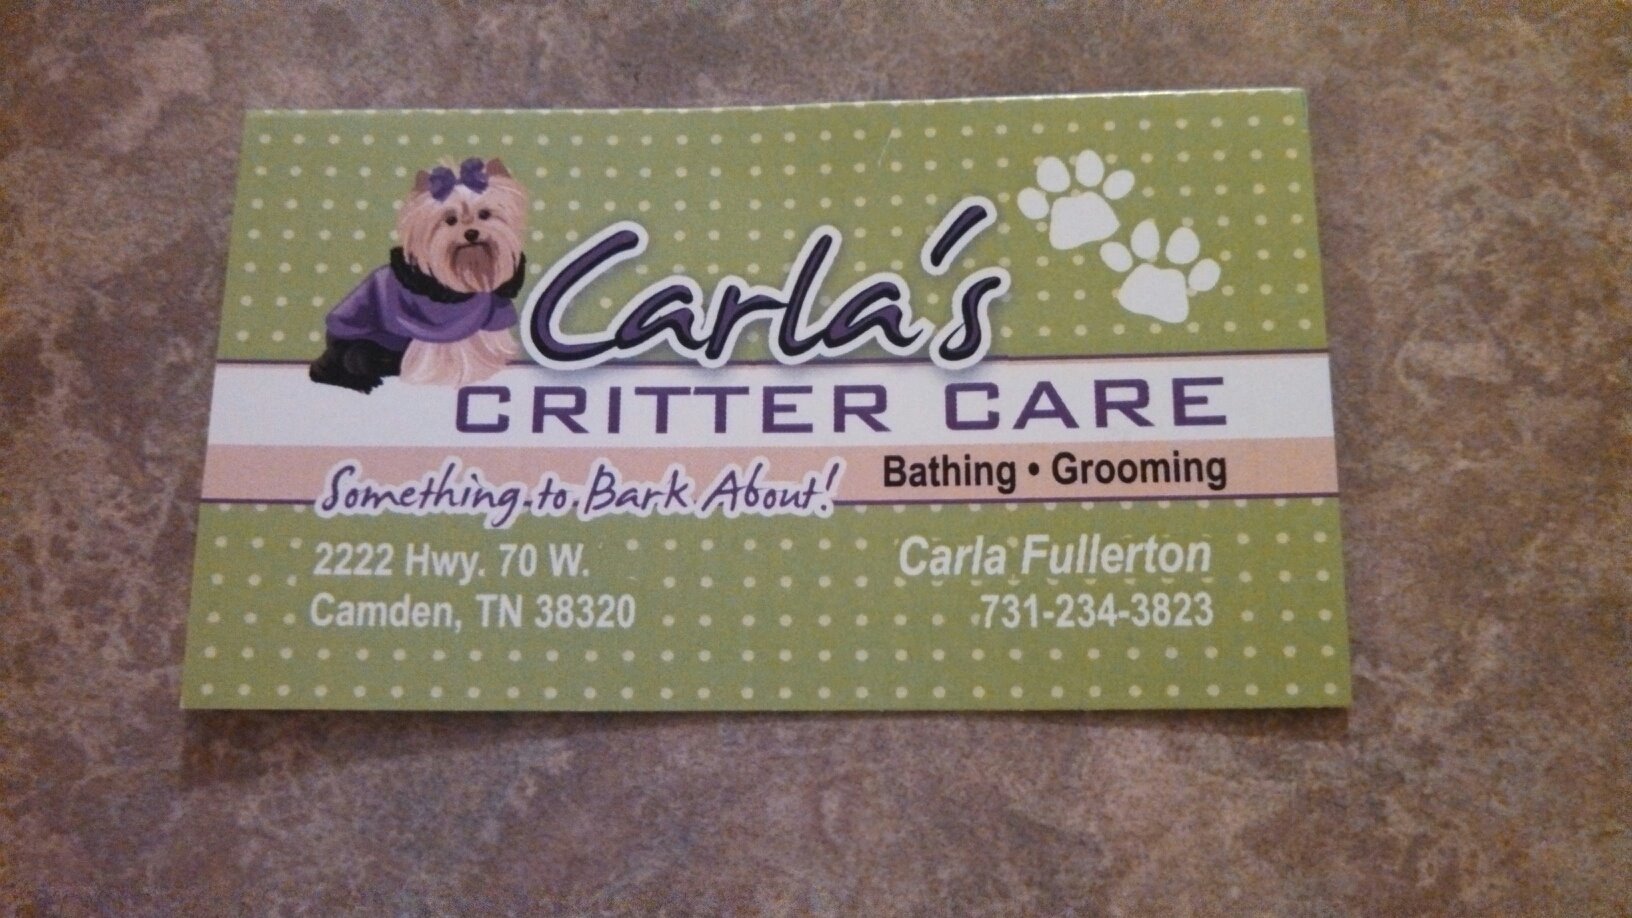 Carla’s Critter Care 2222 Hwy 70 W, Camden Tennessee 38320